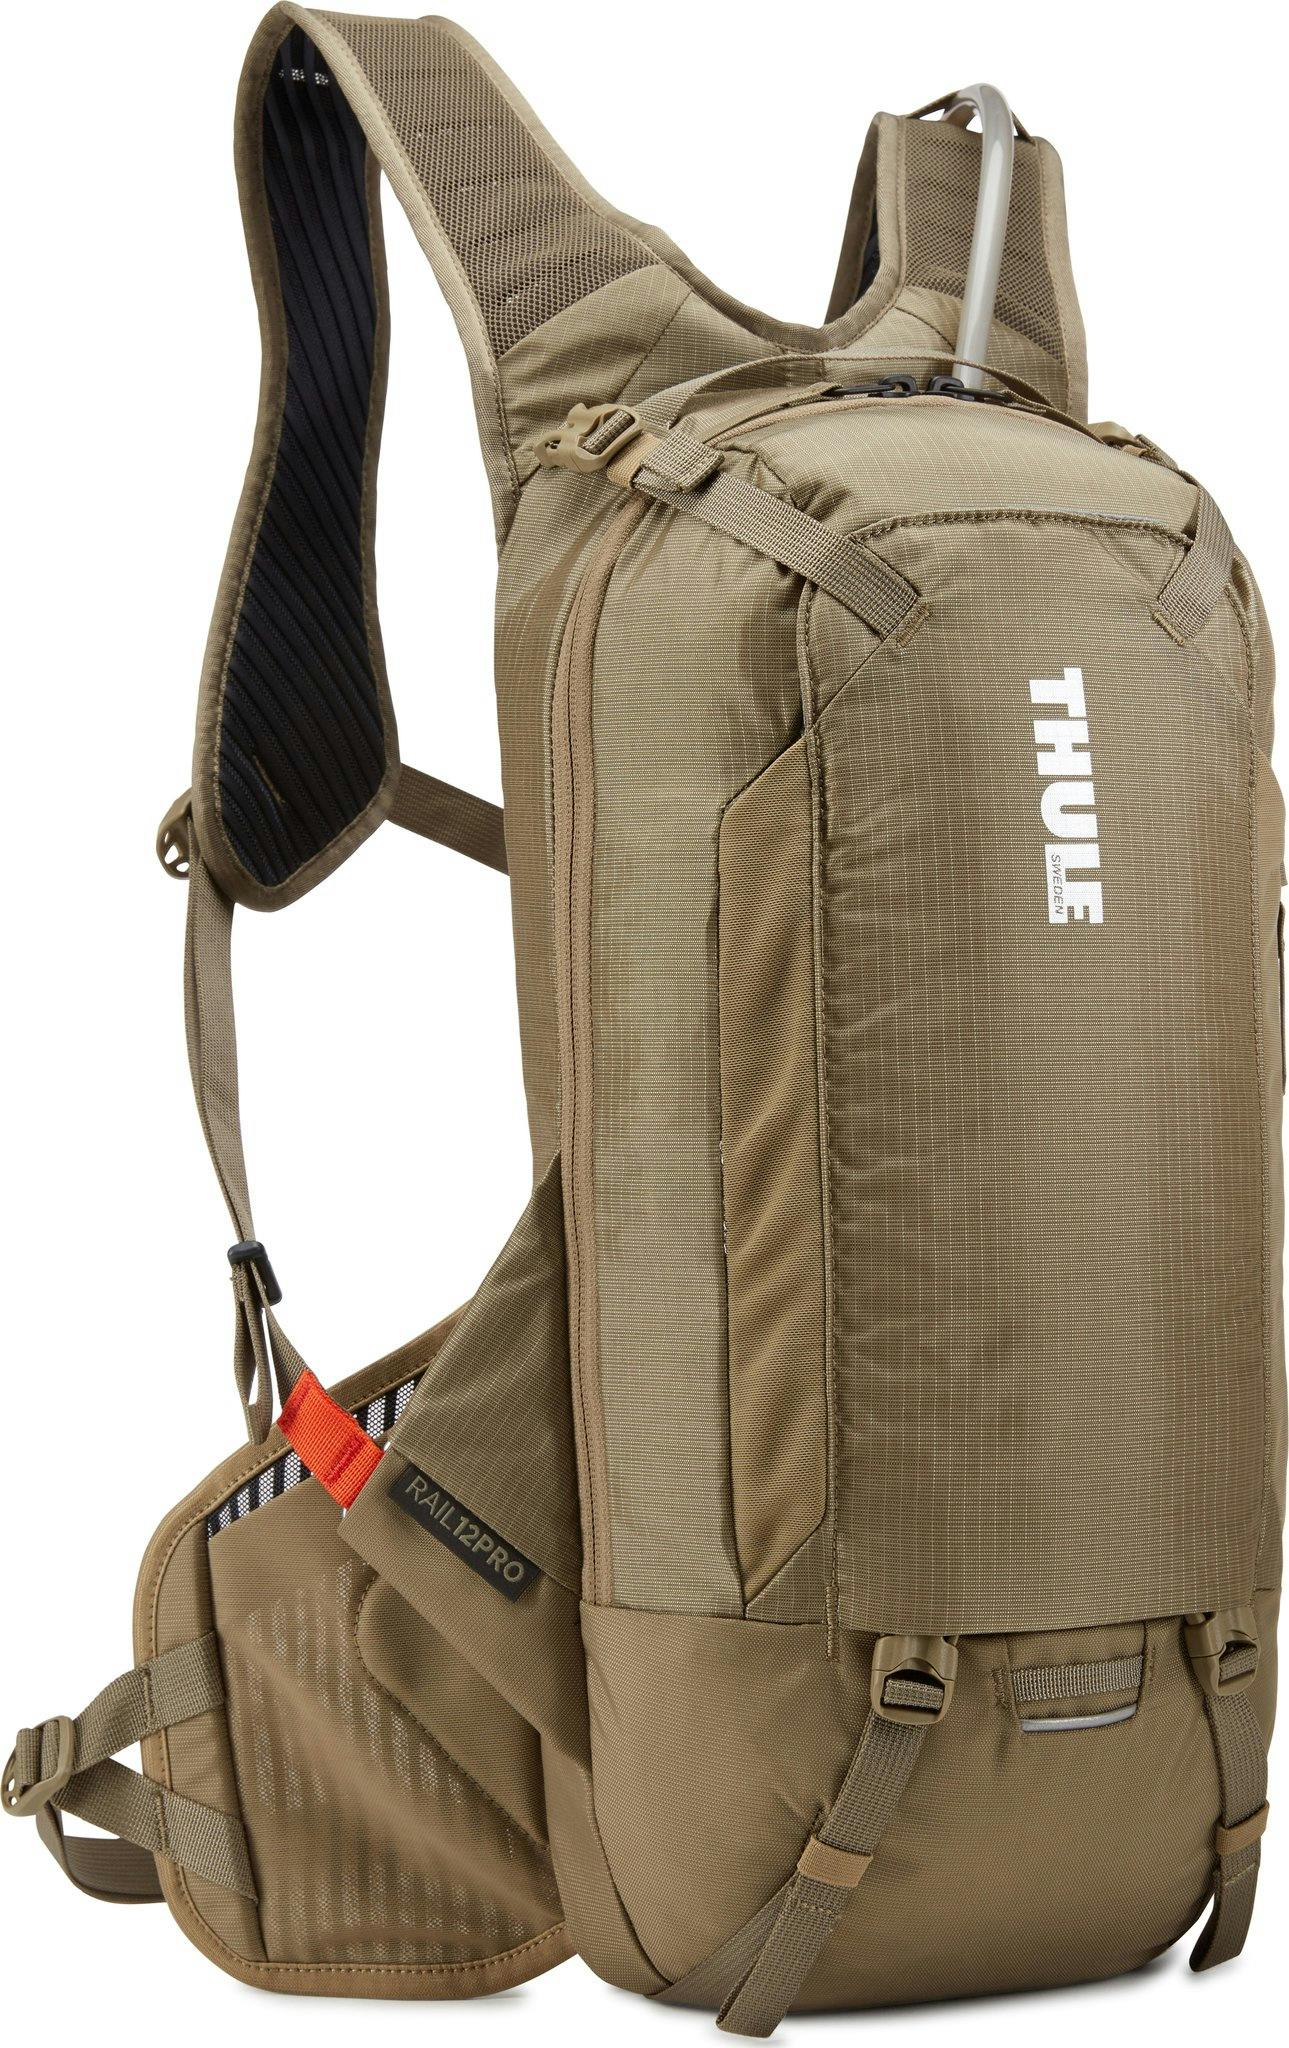 Product image for Rail Pro Hydration Pack 12L